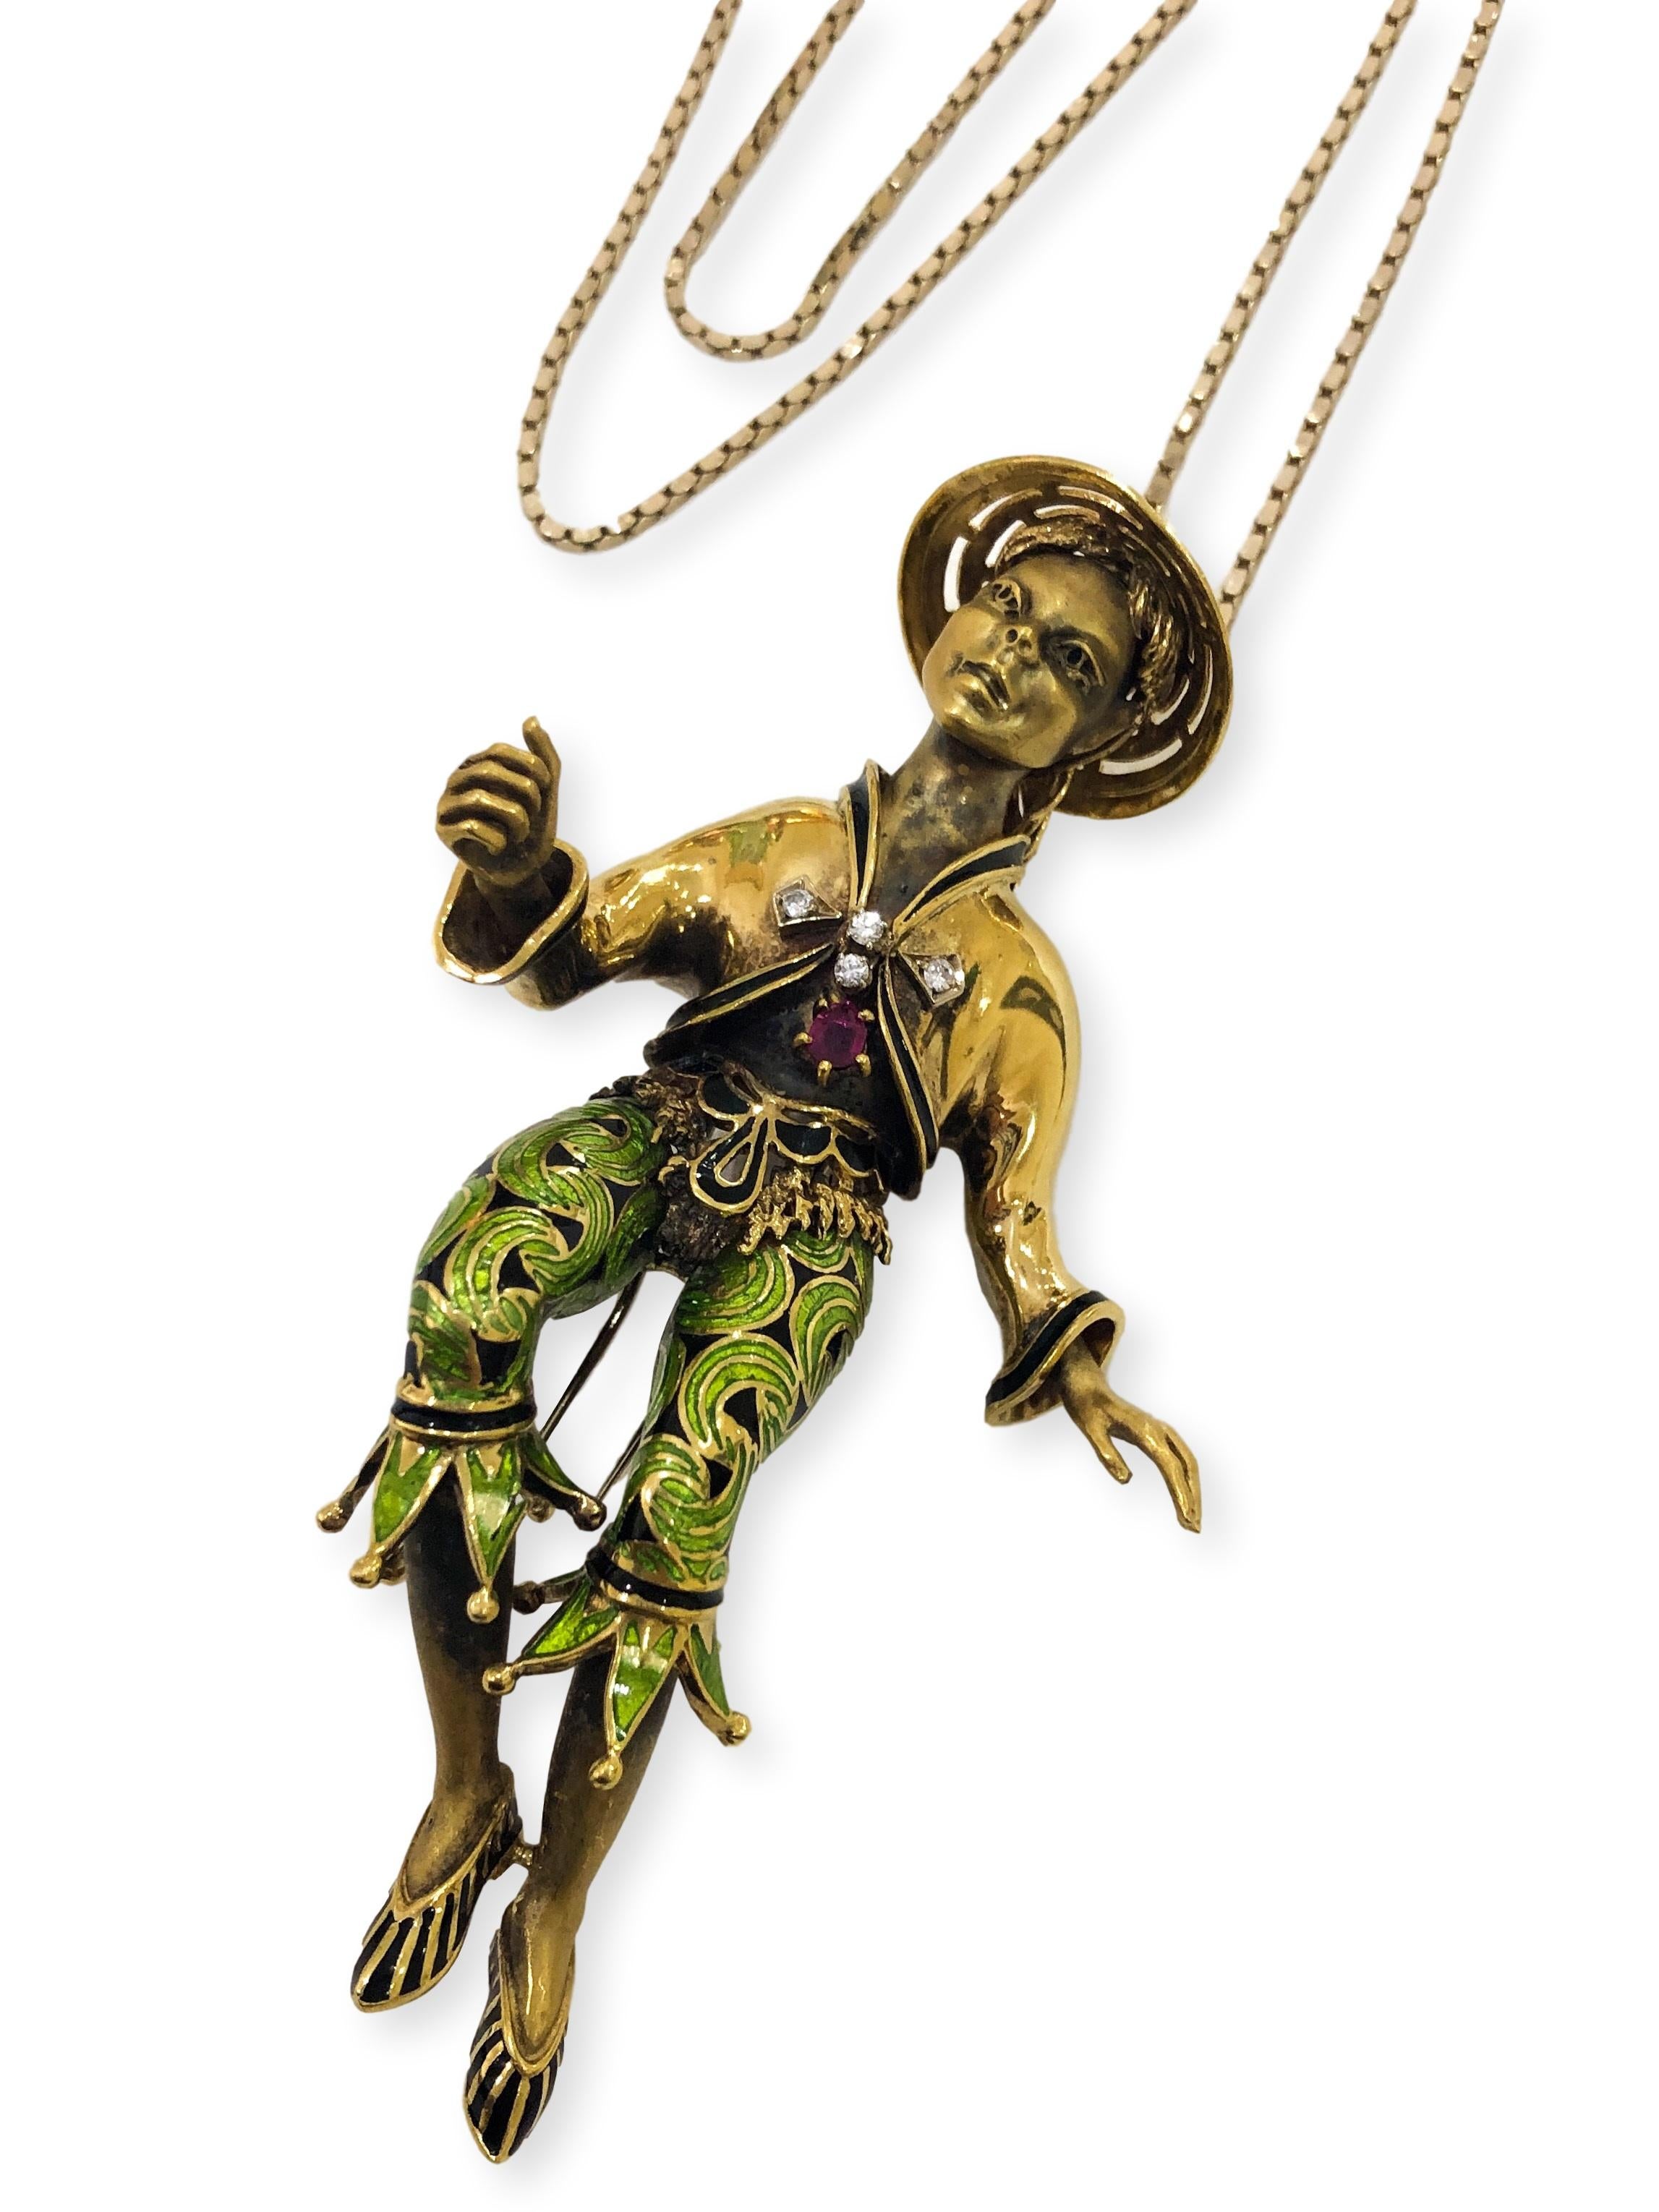 Incredibly special collectors brooch that converts into a pendant. Beautiful China Girl dancing figurine with green and black enameled pants, diamond and dangle ruby jacket and black enameled shoes. The hidden pendant bail slides into the hat. The